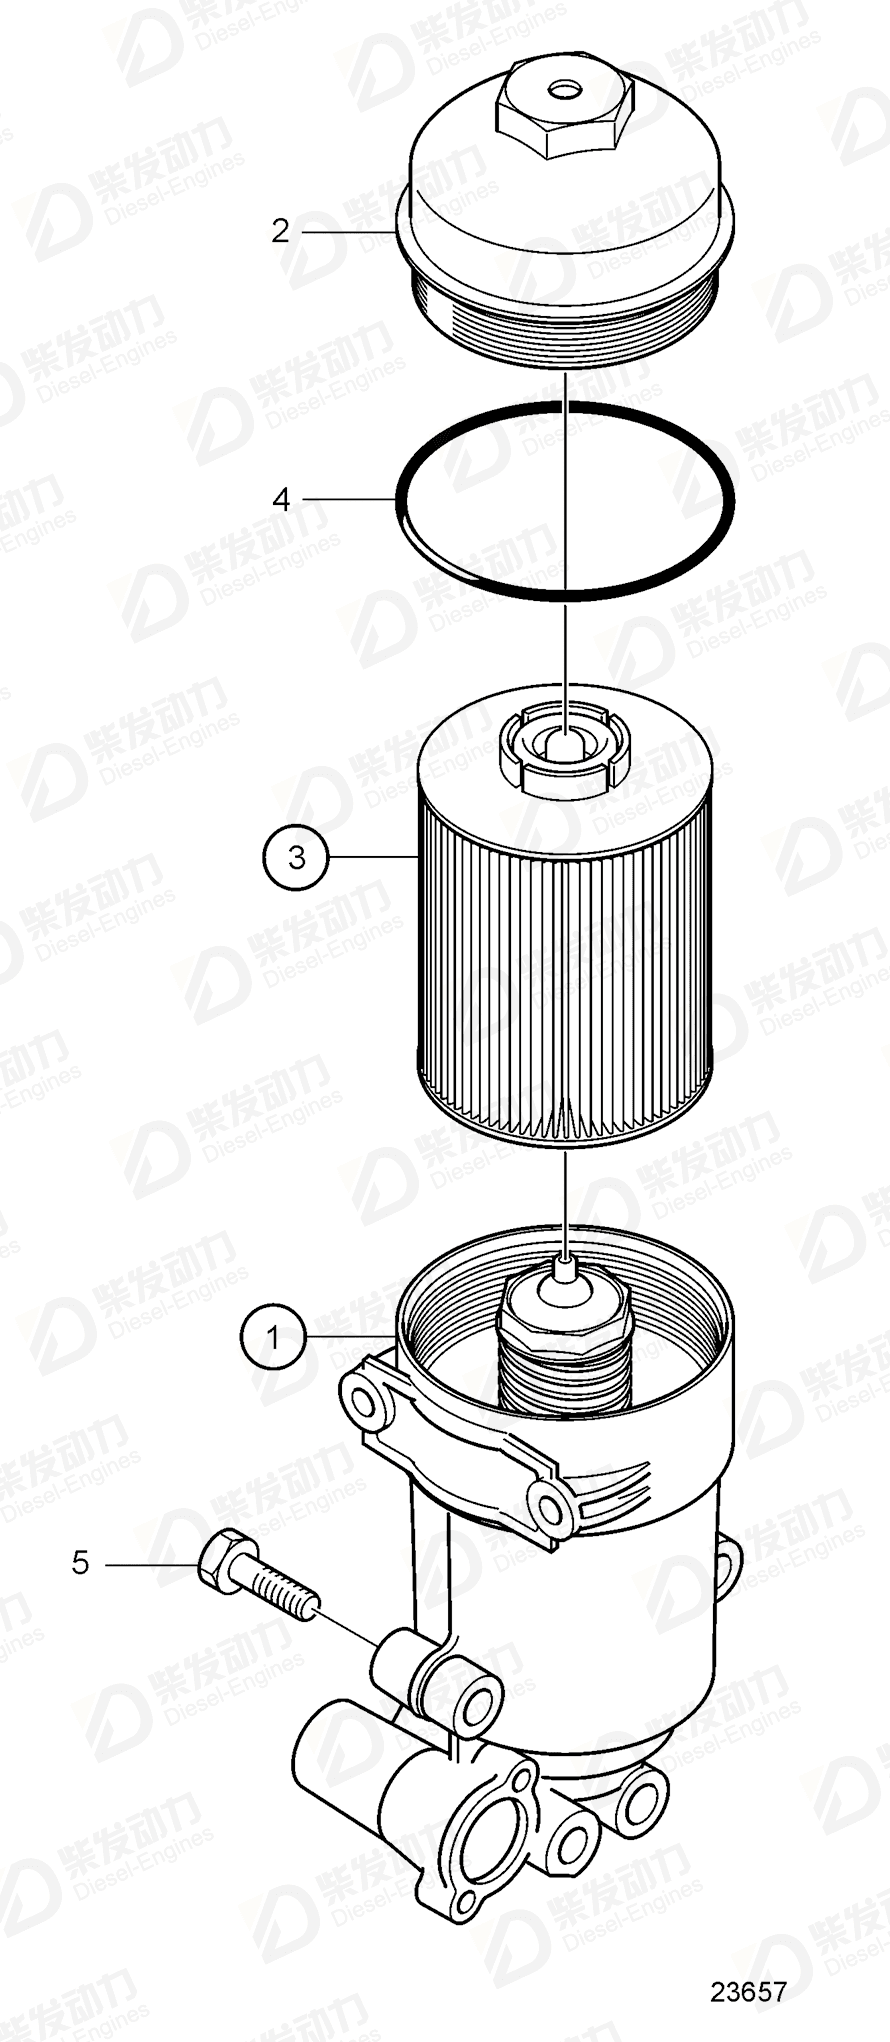 VOLVO Fuel filter 20998805 Drawing